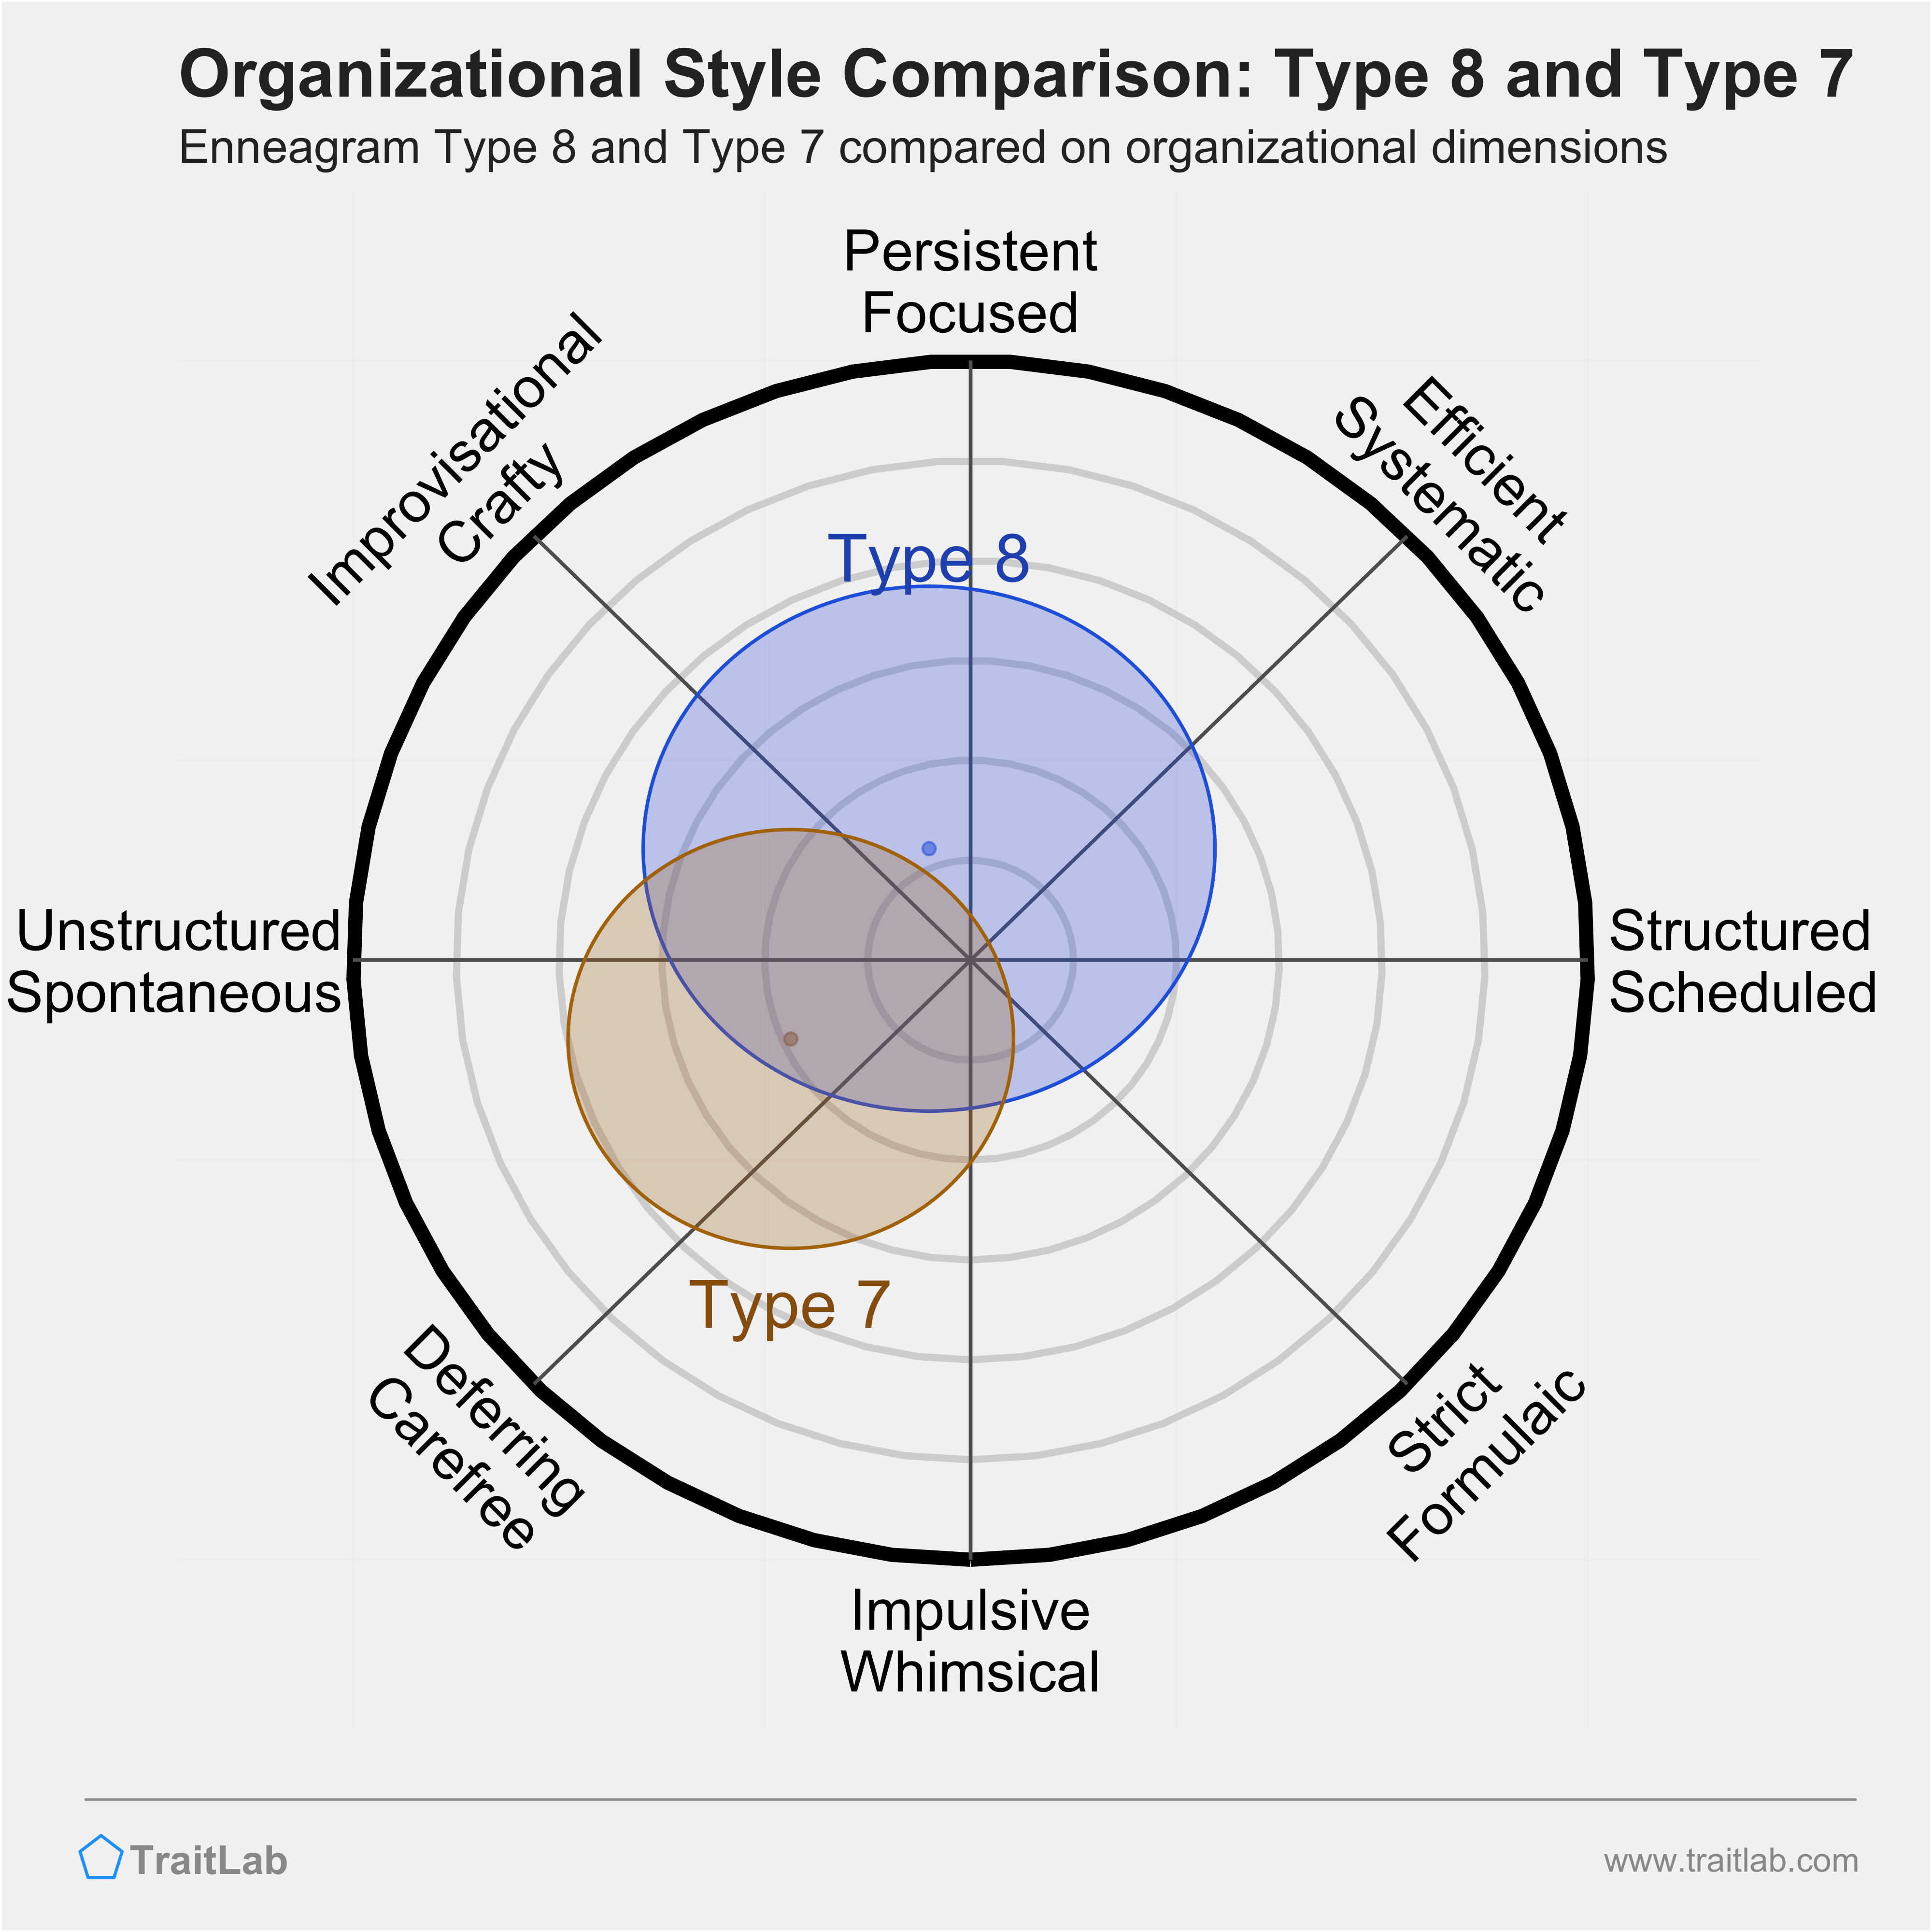 Type 8 and Type 7 comparison across organizational dimensions